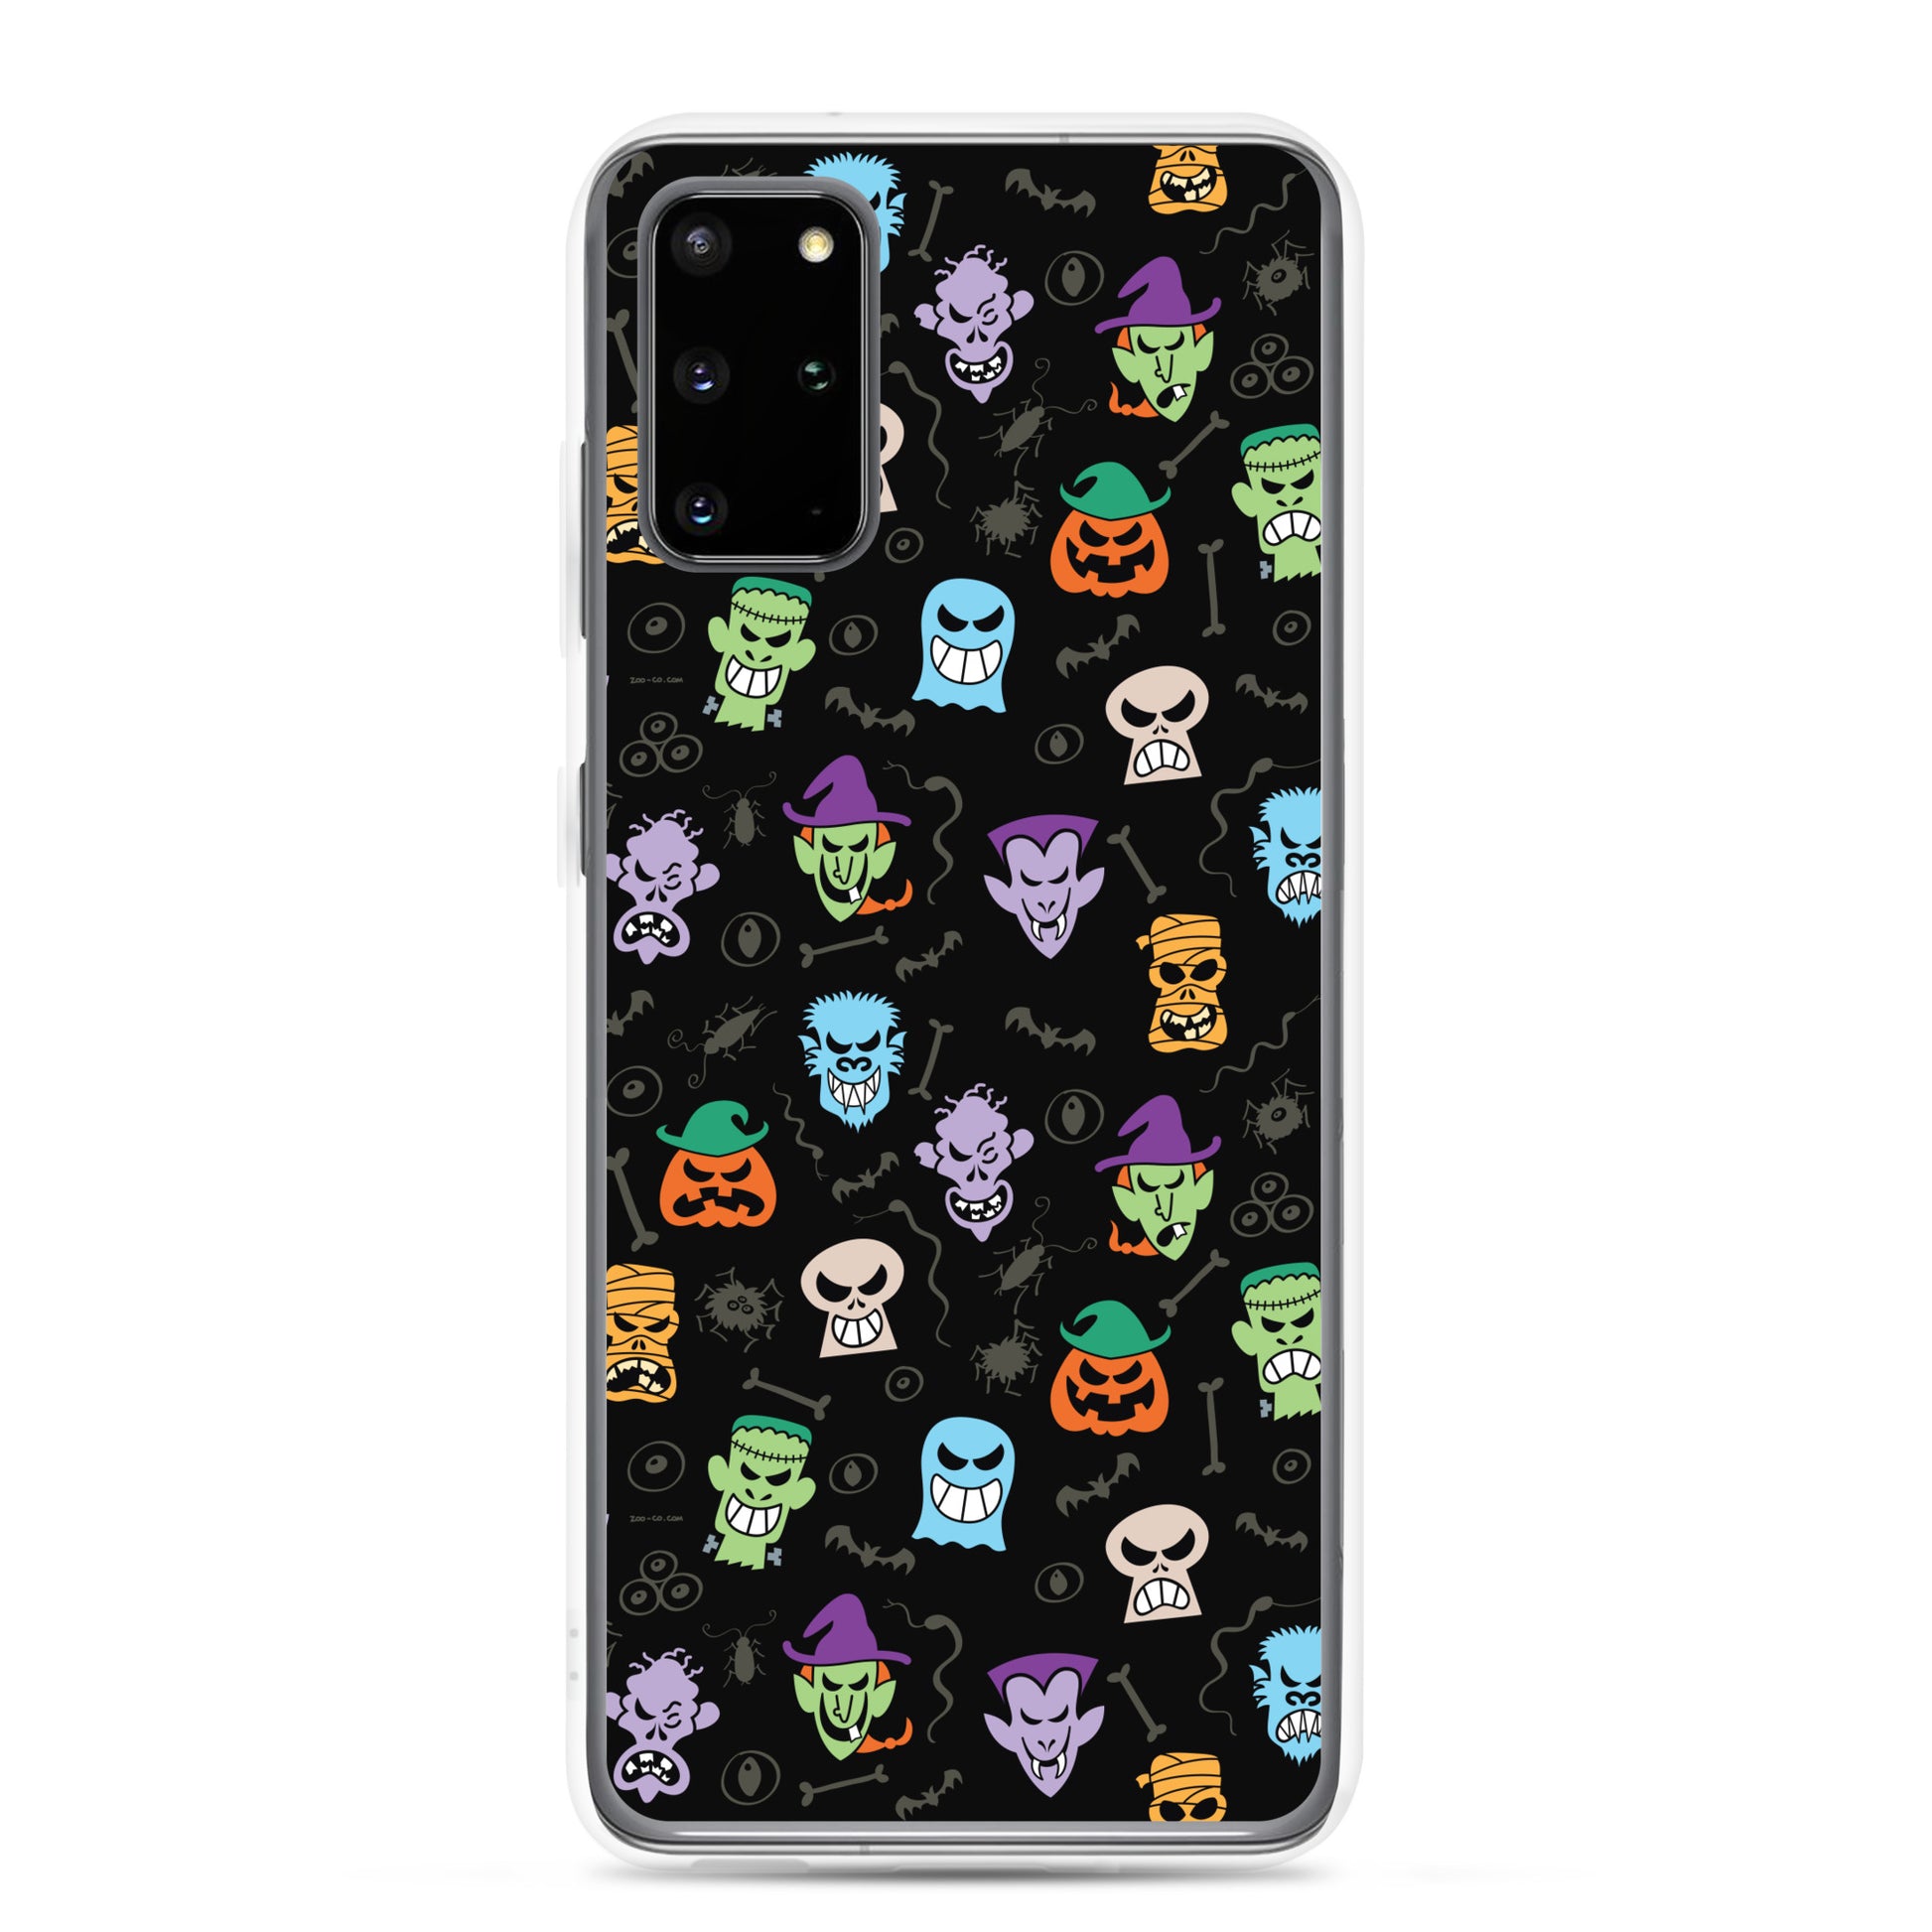 Scary Halloween faces Samsung Case. s20 plus